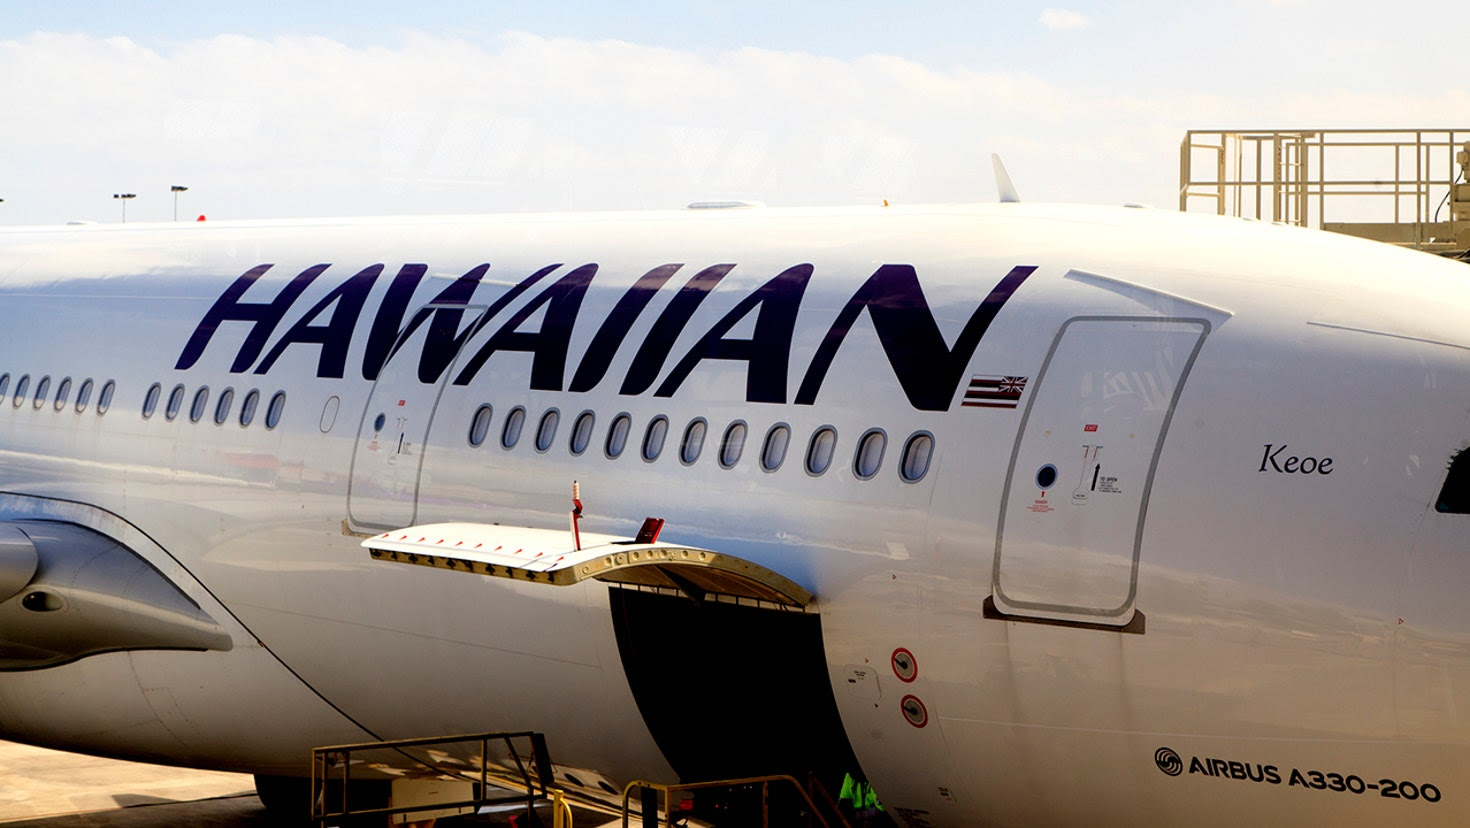 Hawaiian Airlines flight makes an emergency landing - here are the details